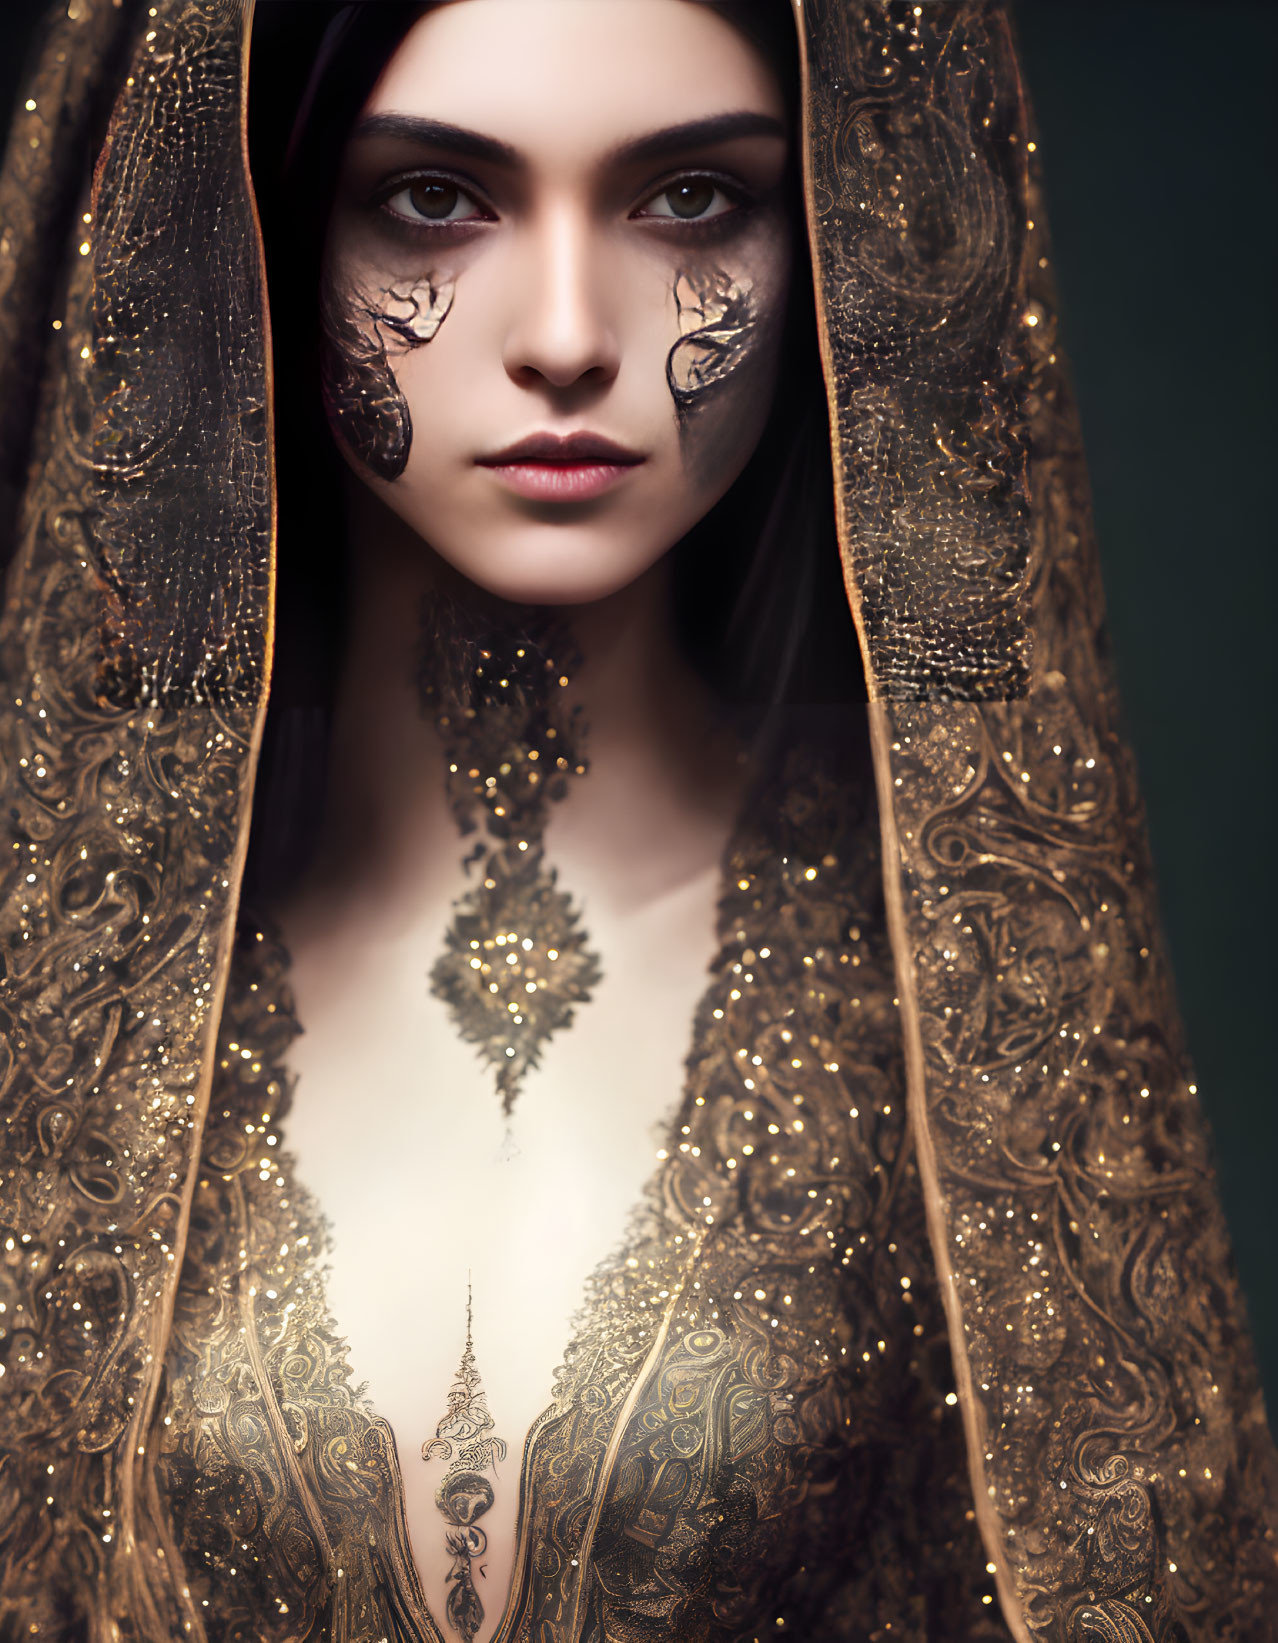 Woman with Elaborate Facial Tattoos Under Gold-Embellished Hood